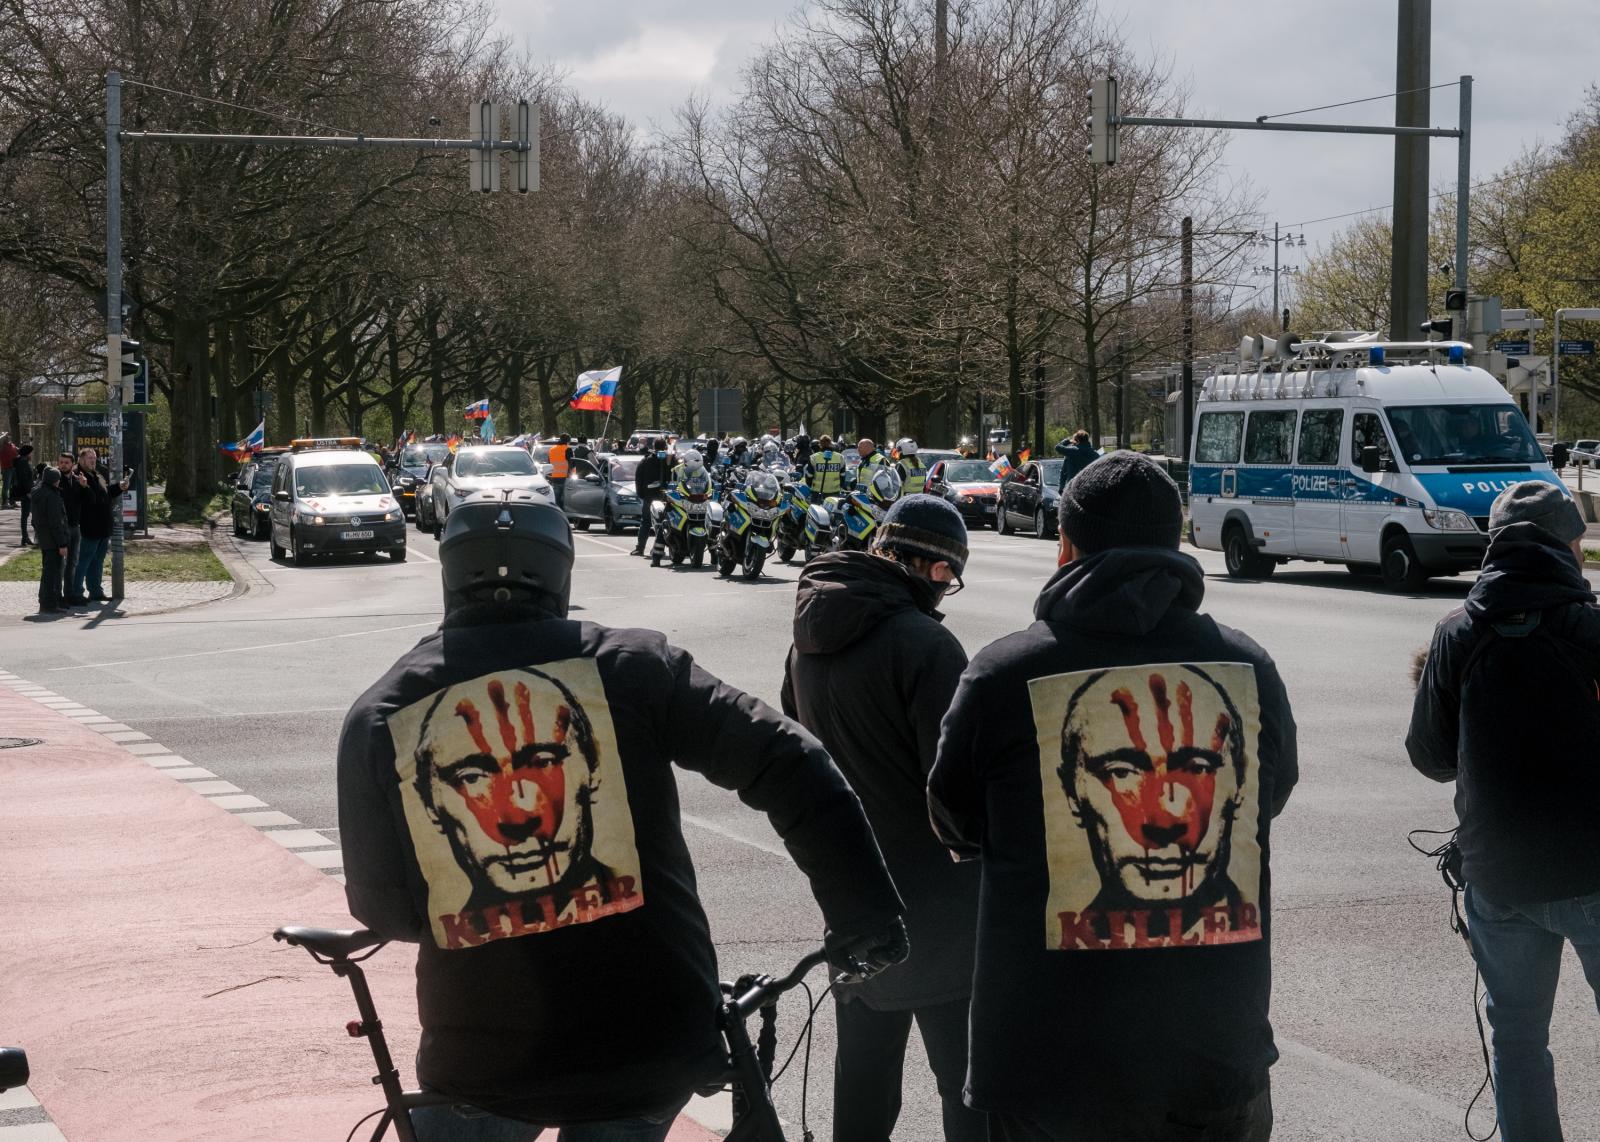 Russian Motorcade in Hanover Blocked - Two men in hoodies with Putin's face and the words...